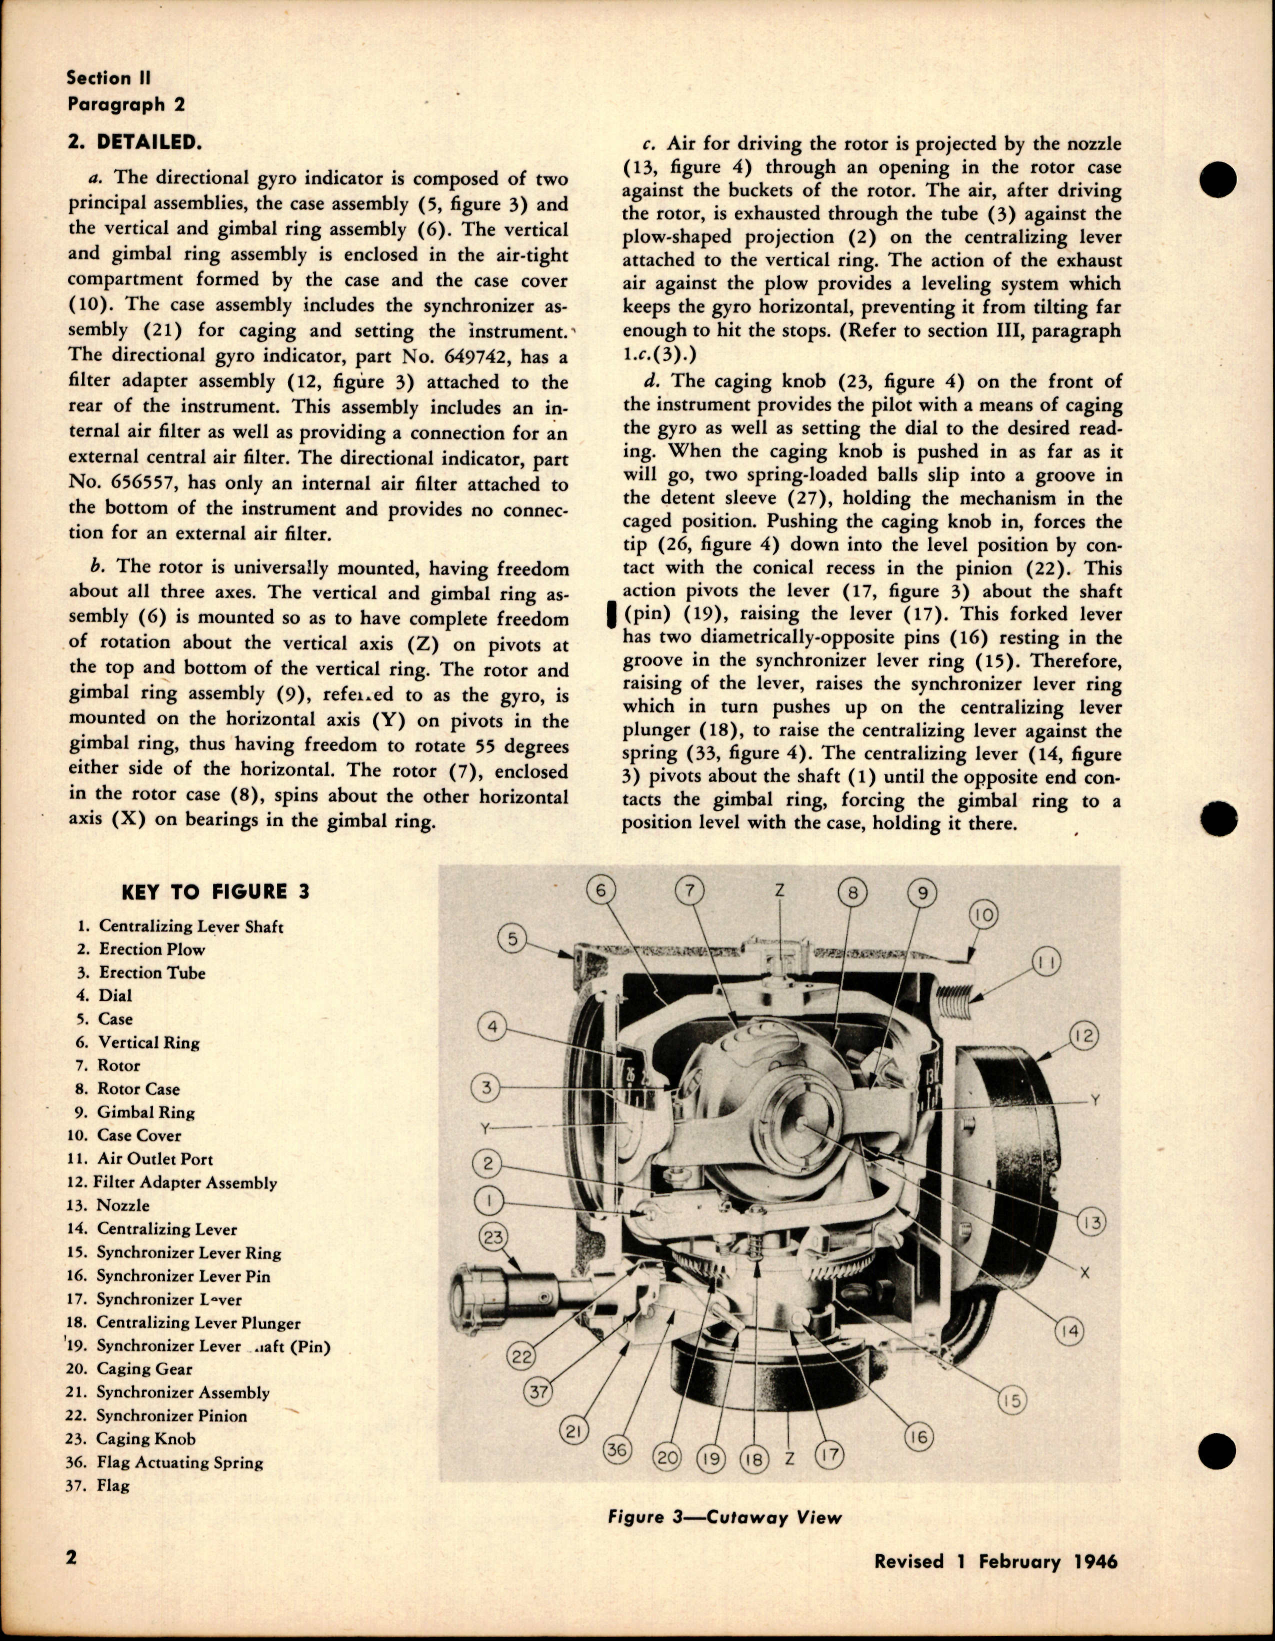 Sample page 6 from AirCorps Library document: Overhaul Instructions for Gyro Horizon and Directional Gyro Indicators